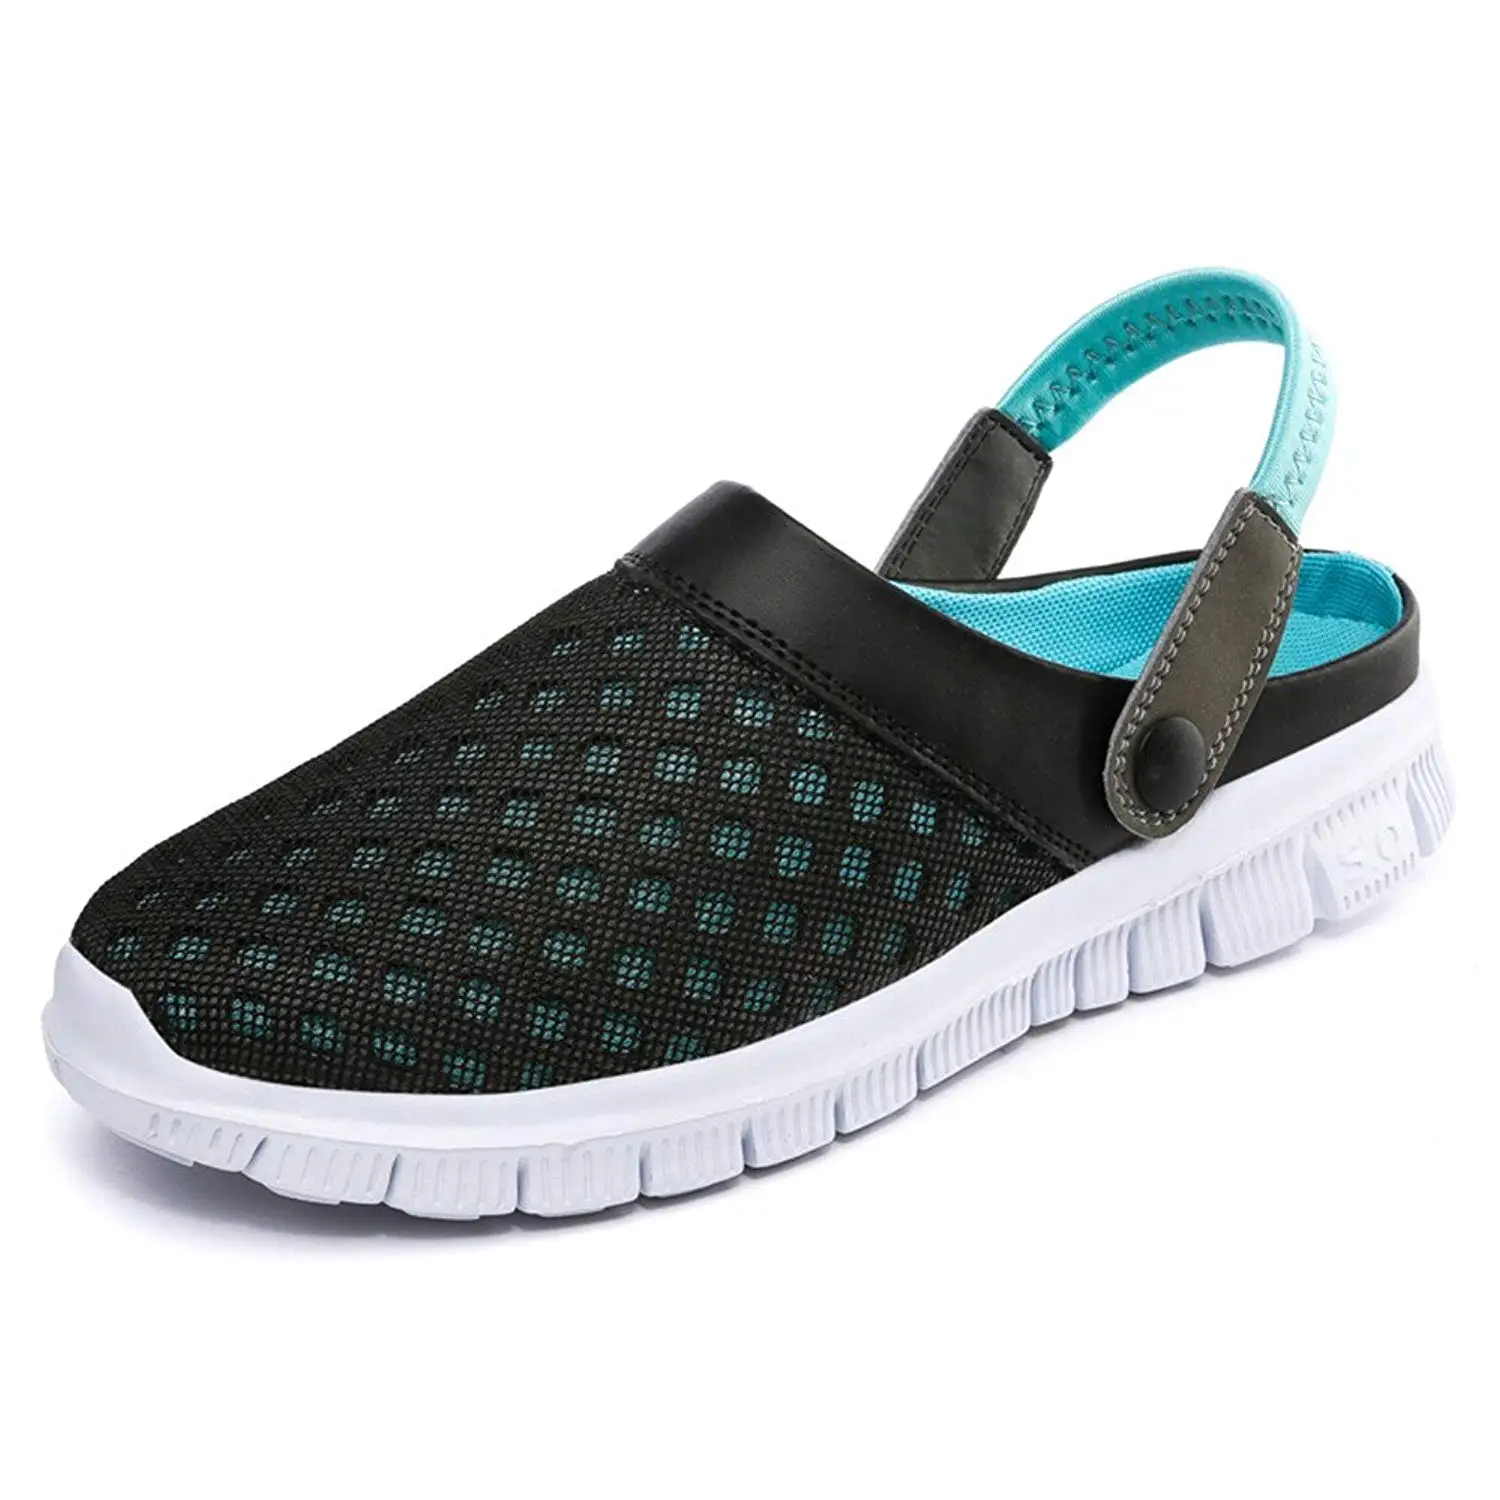 Cheap Water Slippers, find Water Slippers deals on line at Alibaba.com